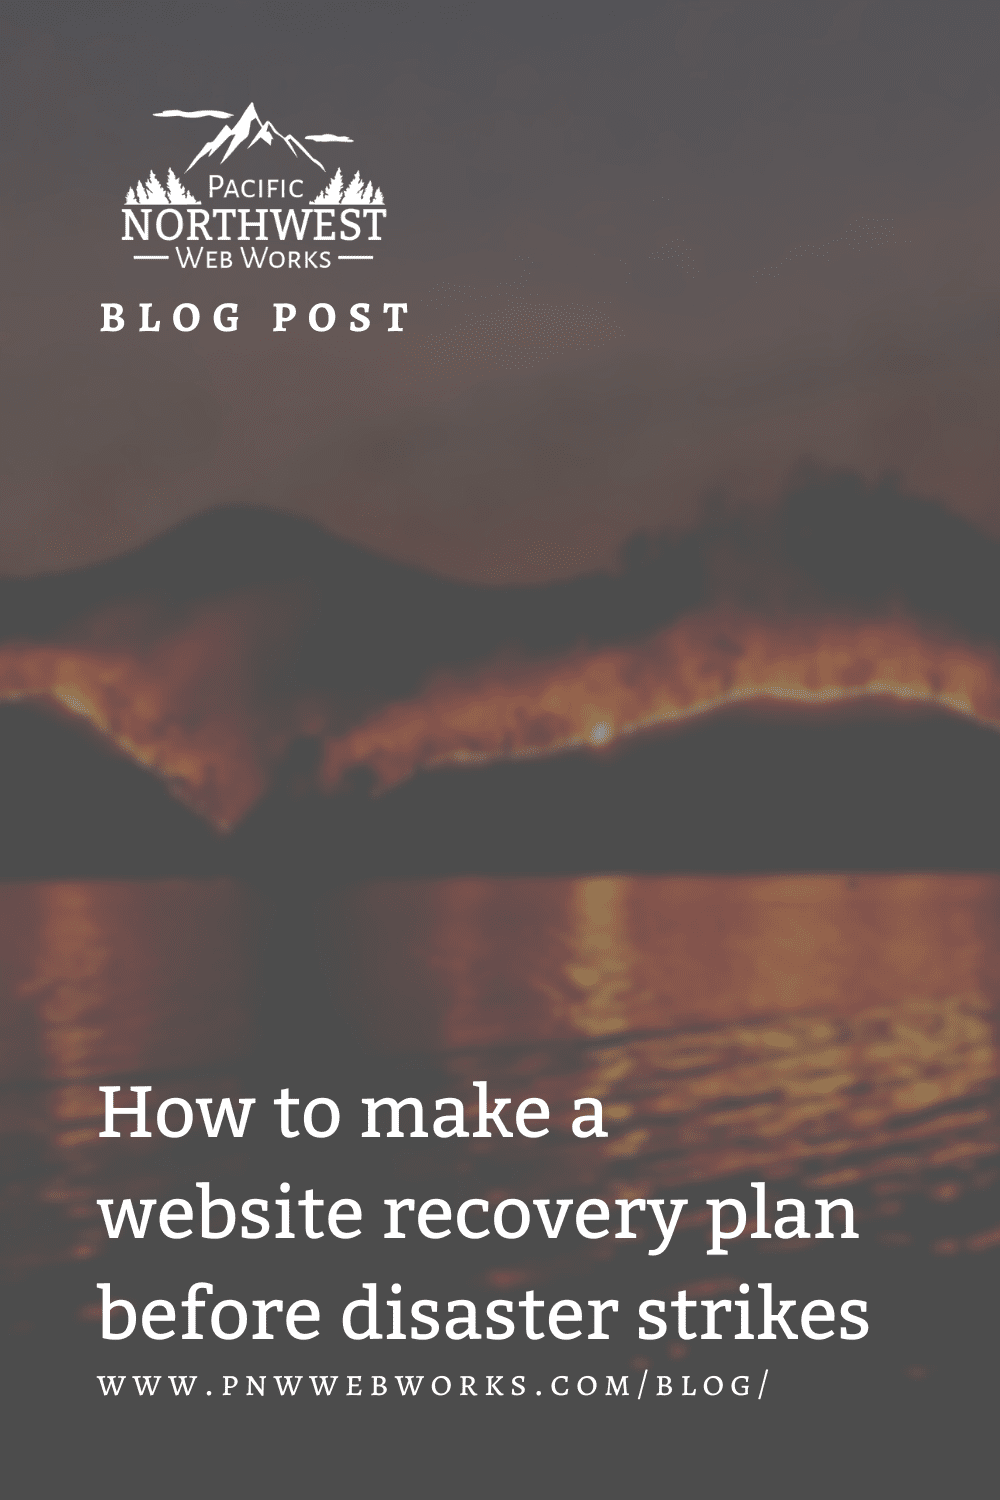 How to make a website recovery plan before disaster strikes